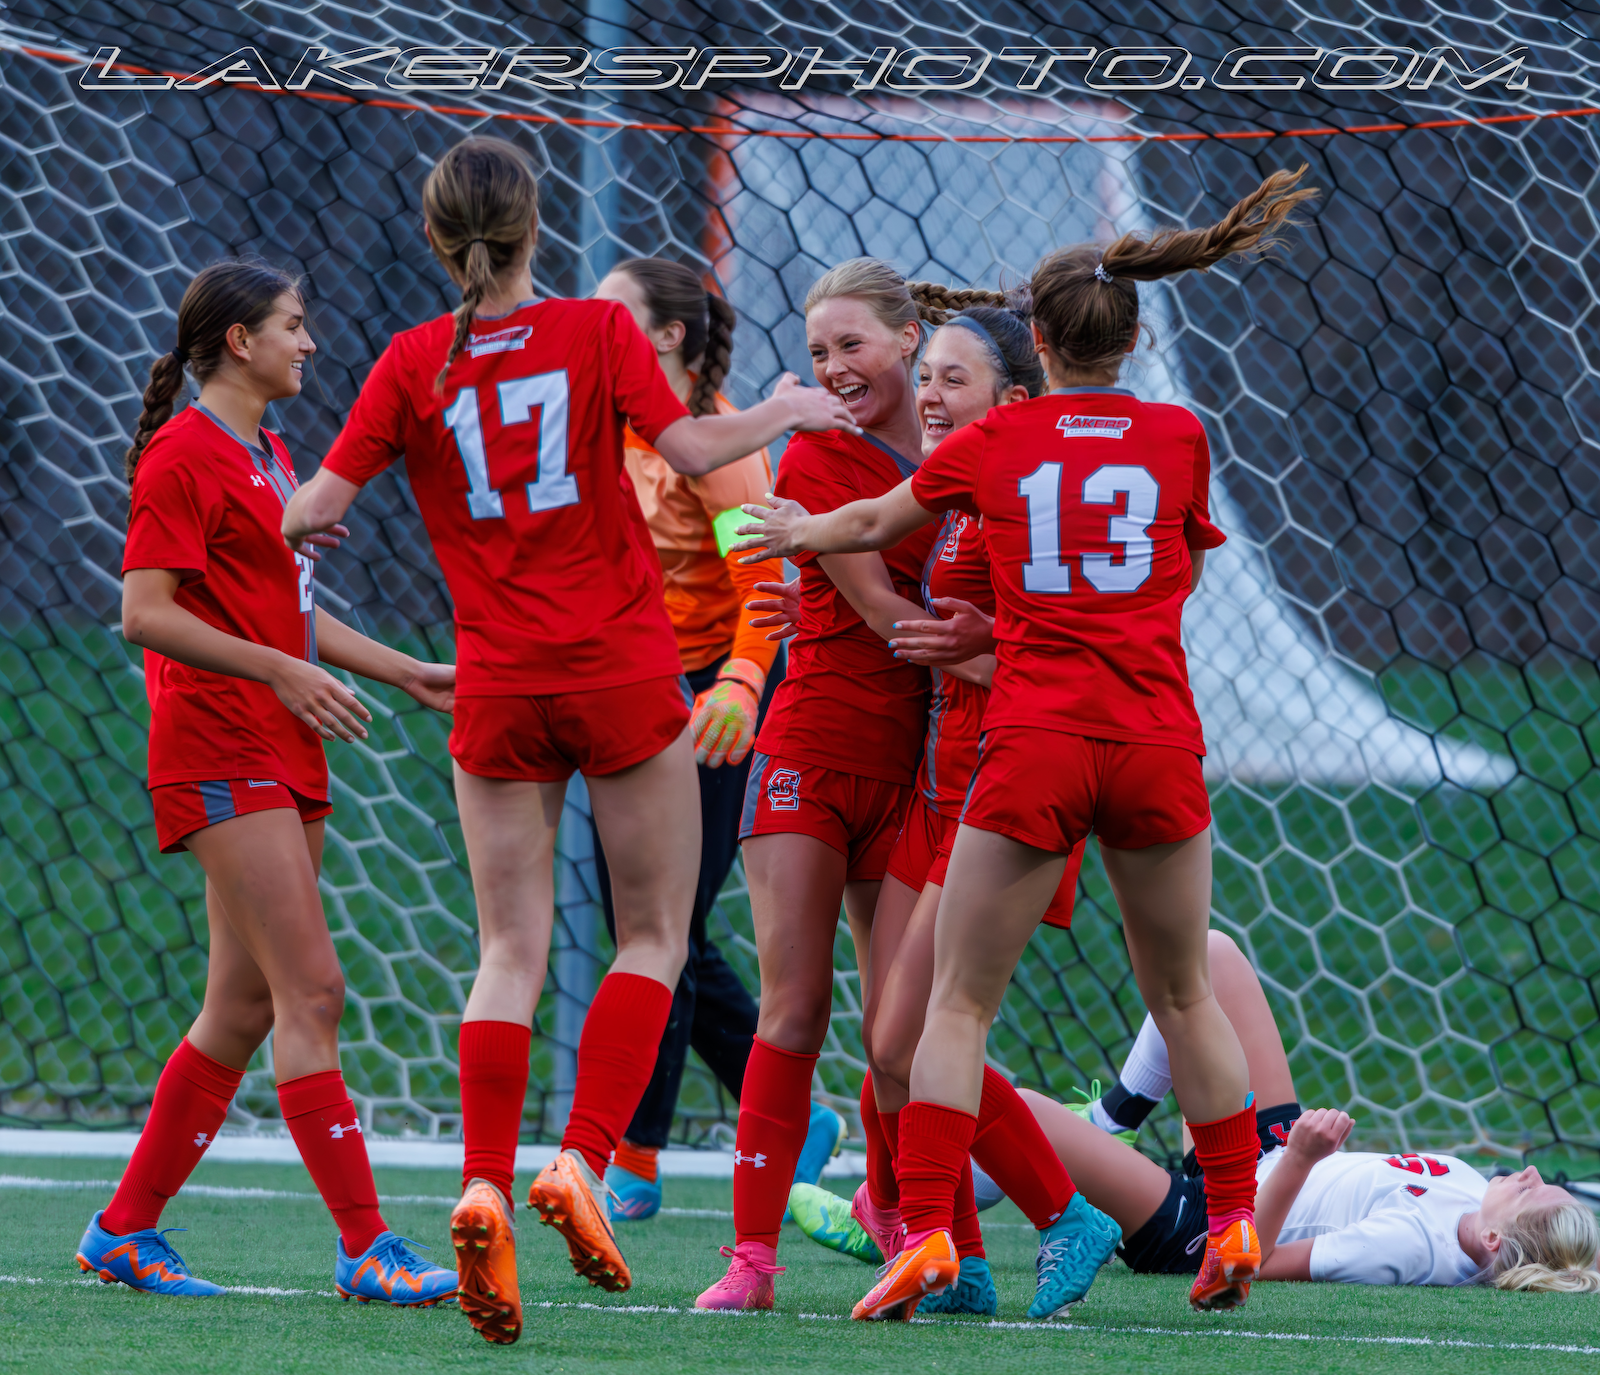 Girls Varsity Soccer Takes Down Allendale gallery cover photo